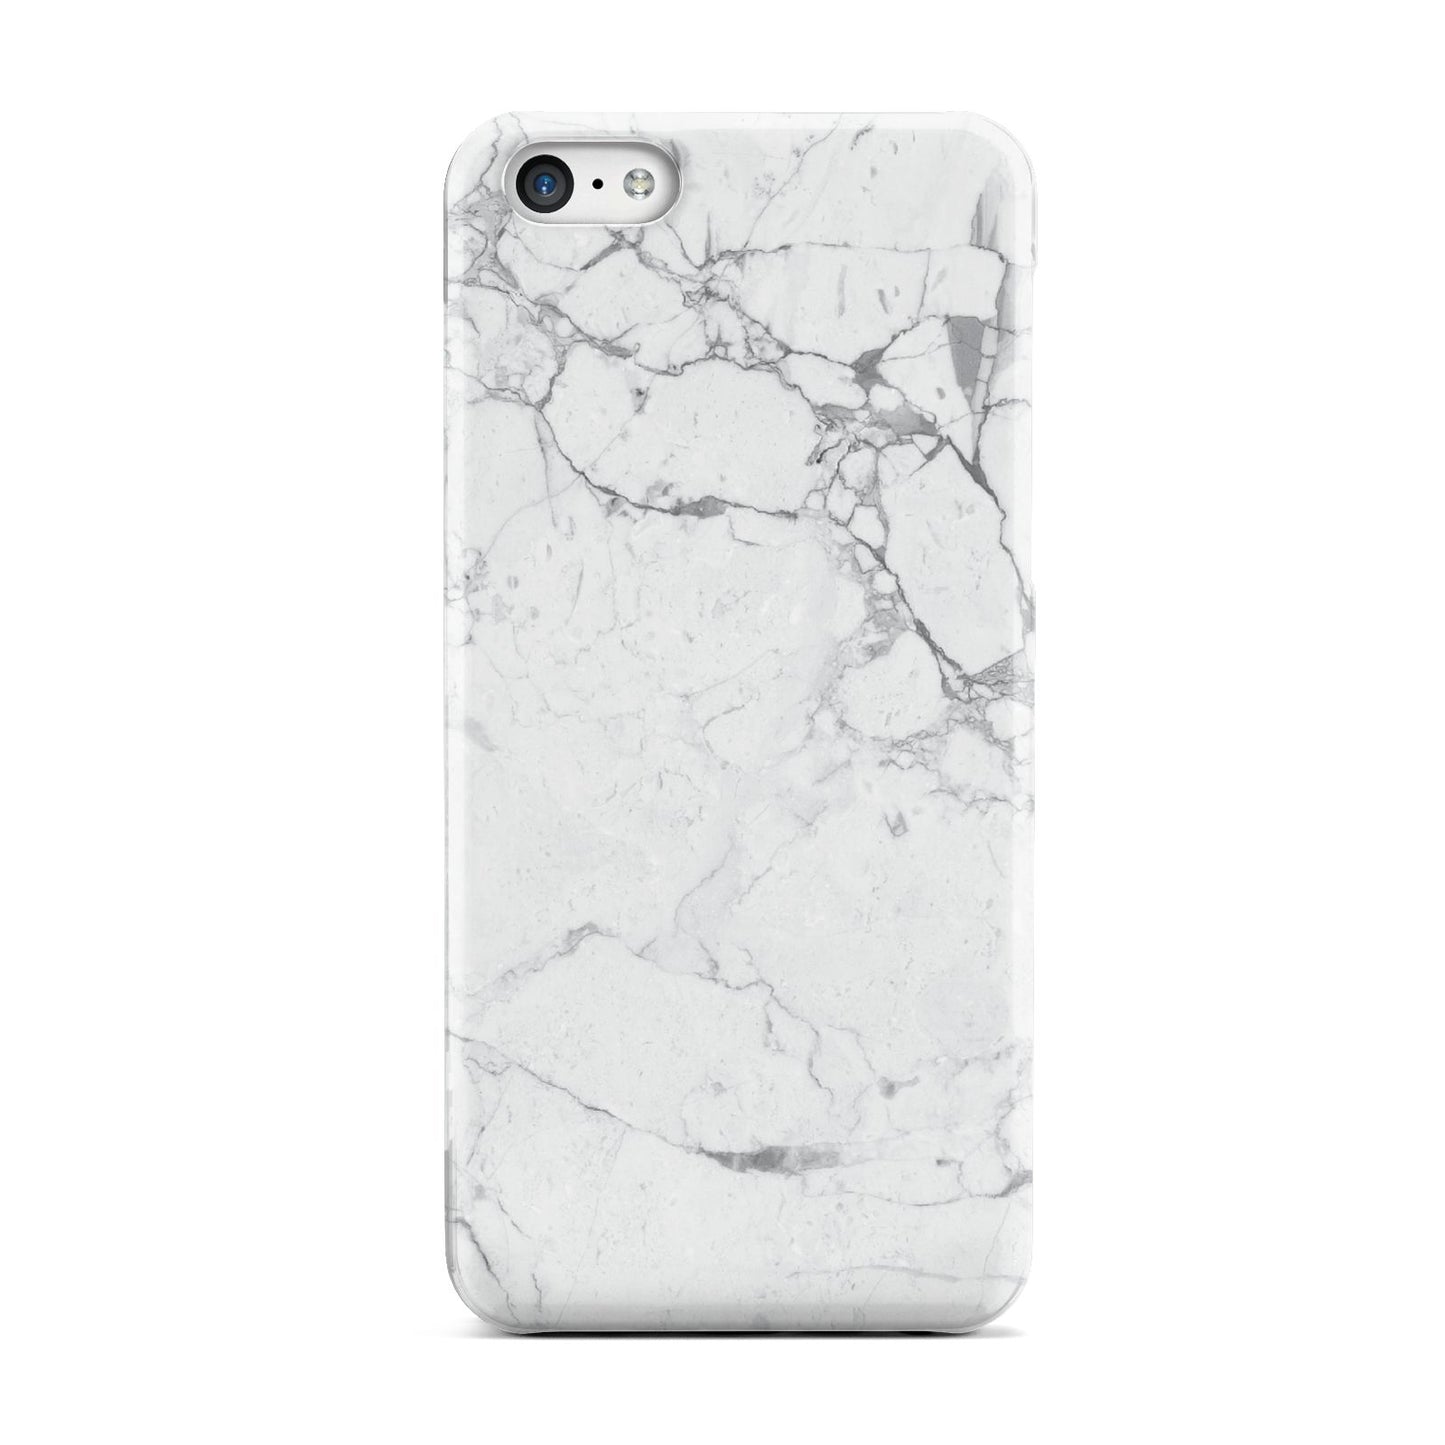 Faux Marble Effect Grey White Apple iPhone 5c Case